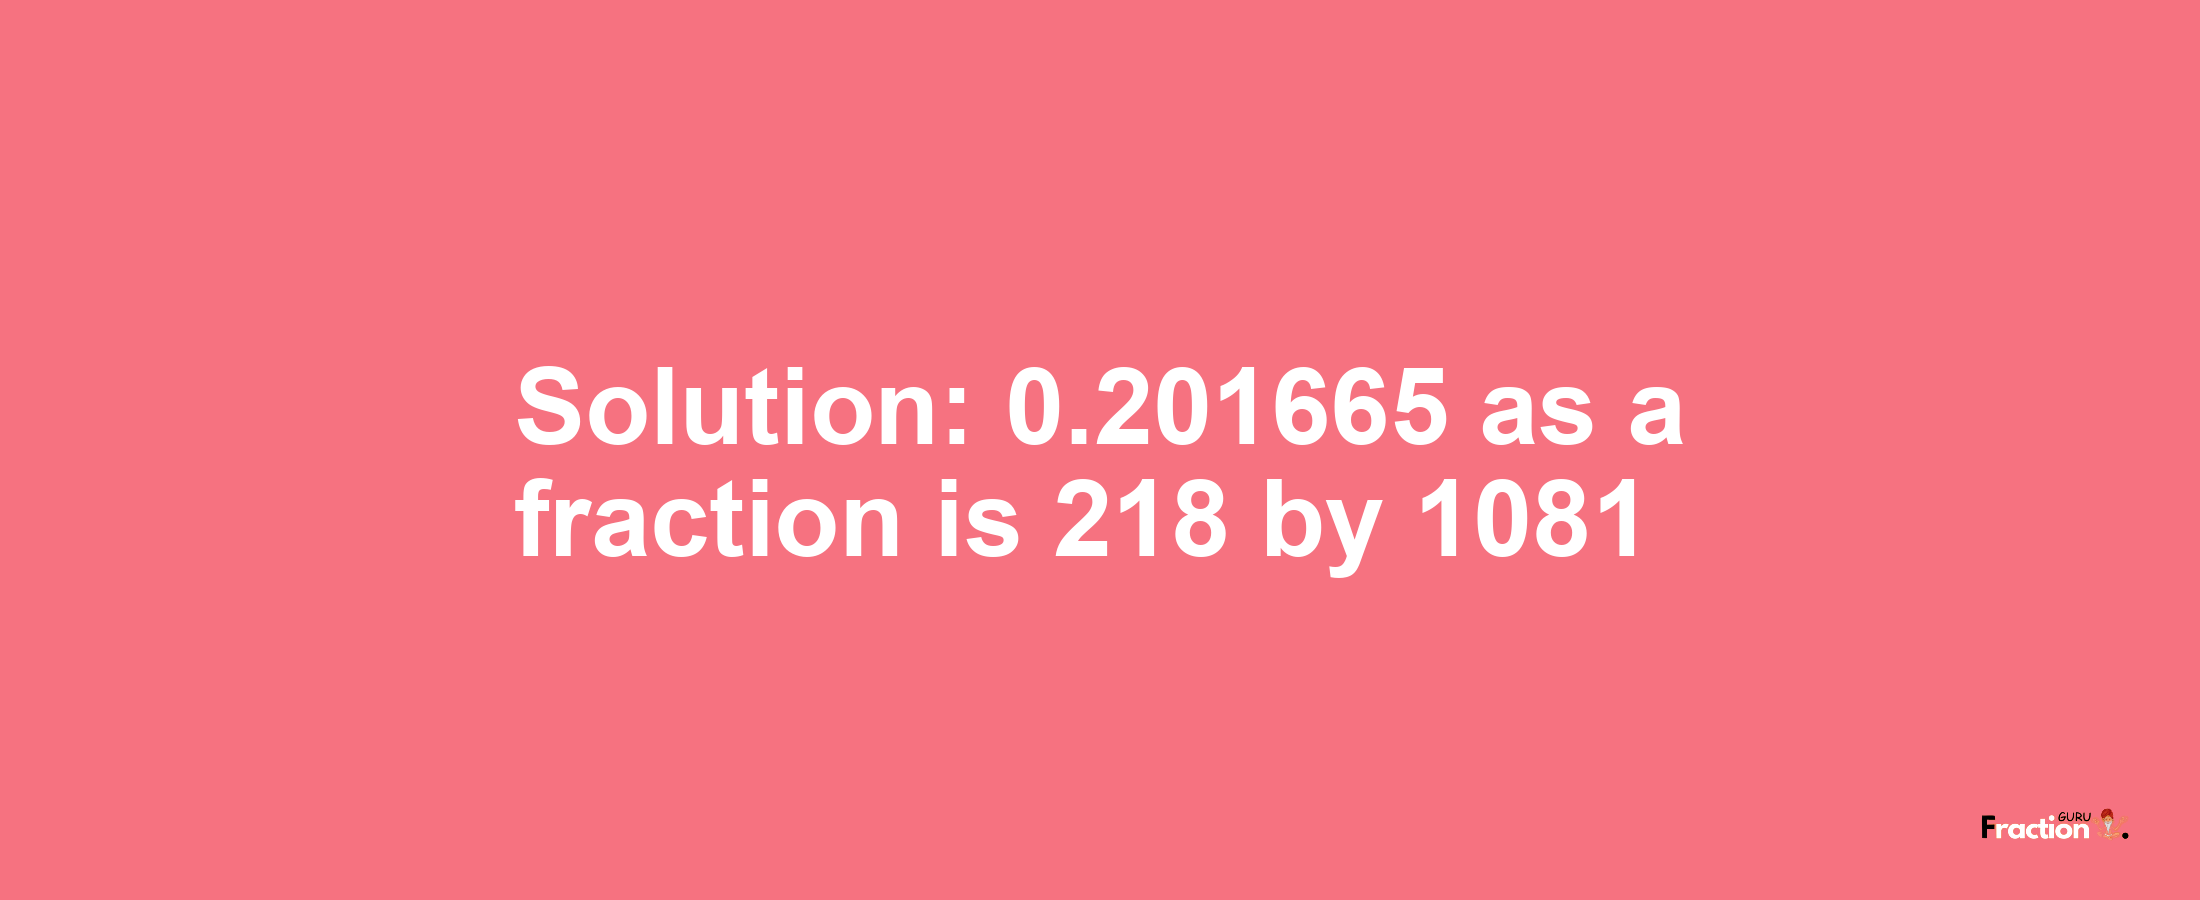 Solution:0.201665 as a fraction is 218/1081